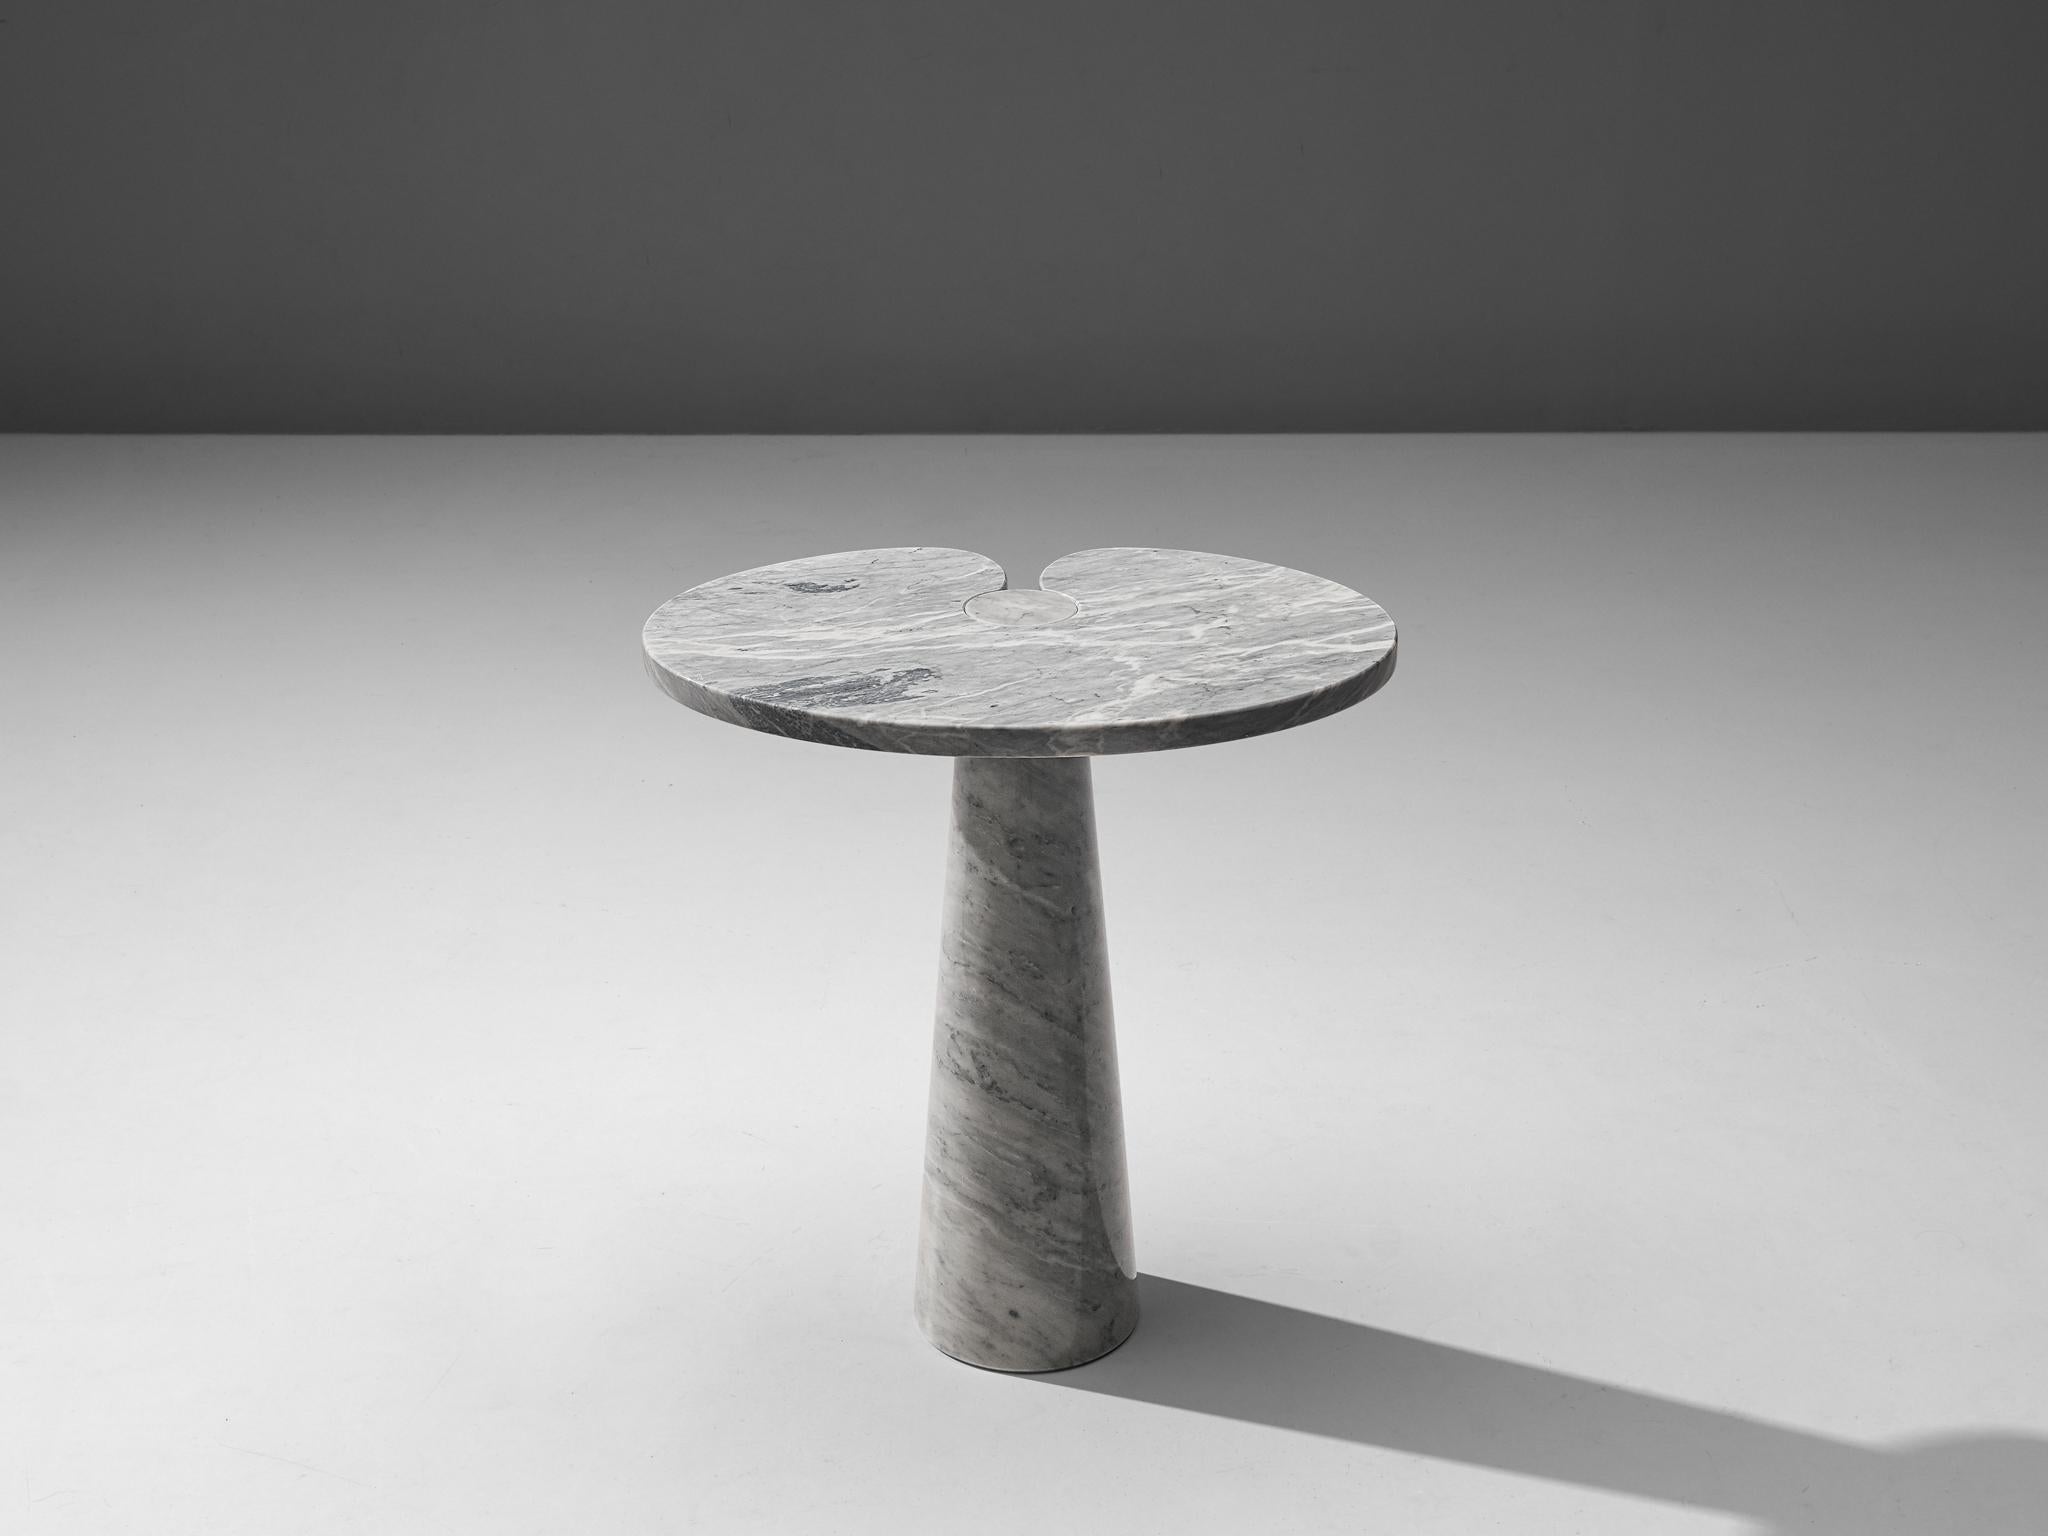 Angelo Mangiarotti, side table 'Eros', white marble, Italy, 1970s

This sculptural table by Angelo Mangiarotti is a skillful example of postmodern design. The lotus leaf like side table features no joints or clamps and is architectural in its